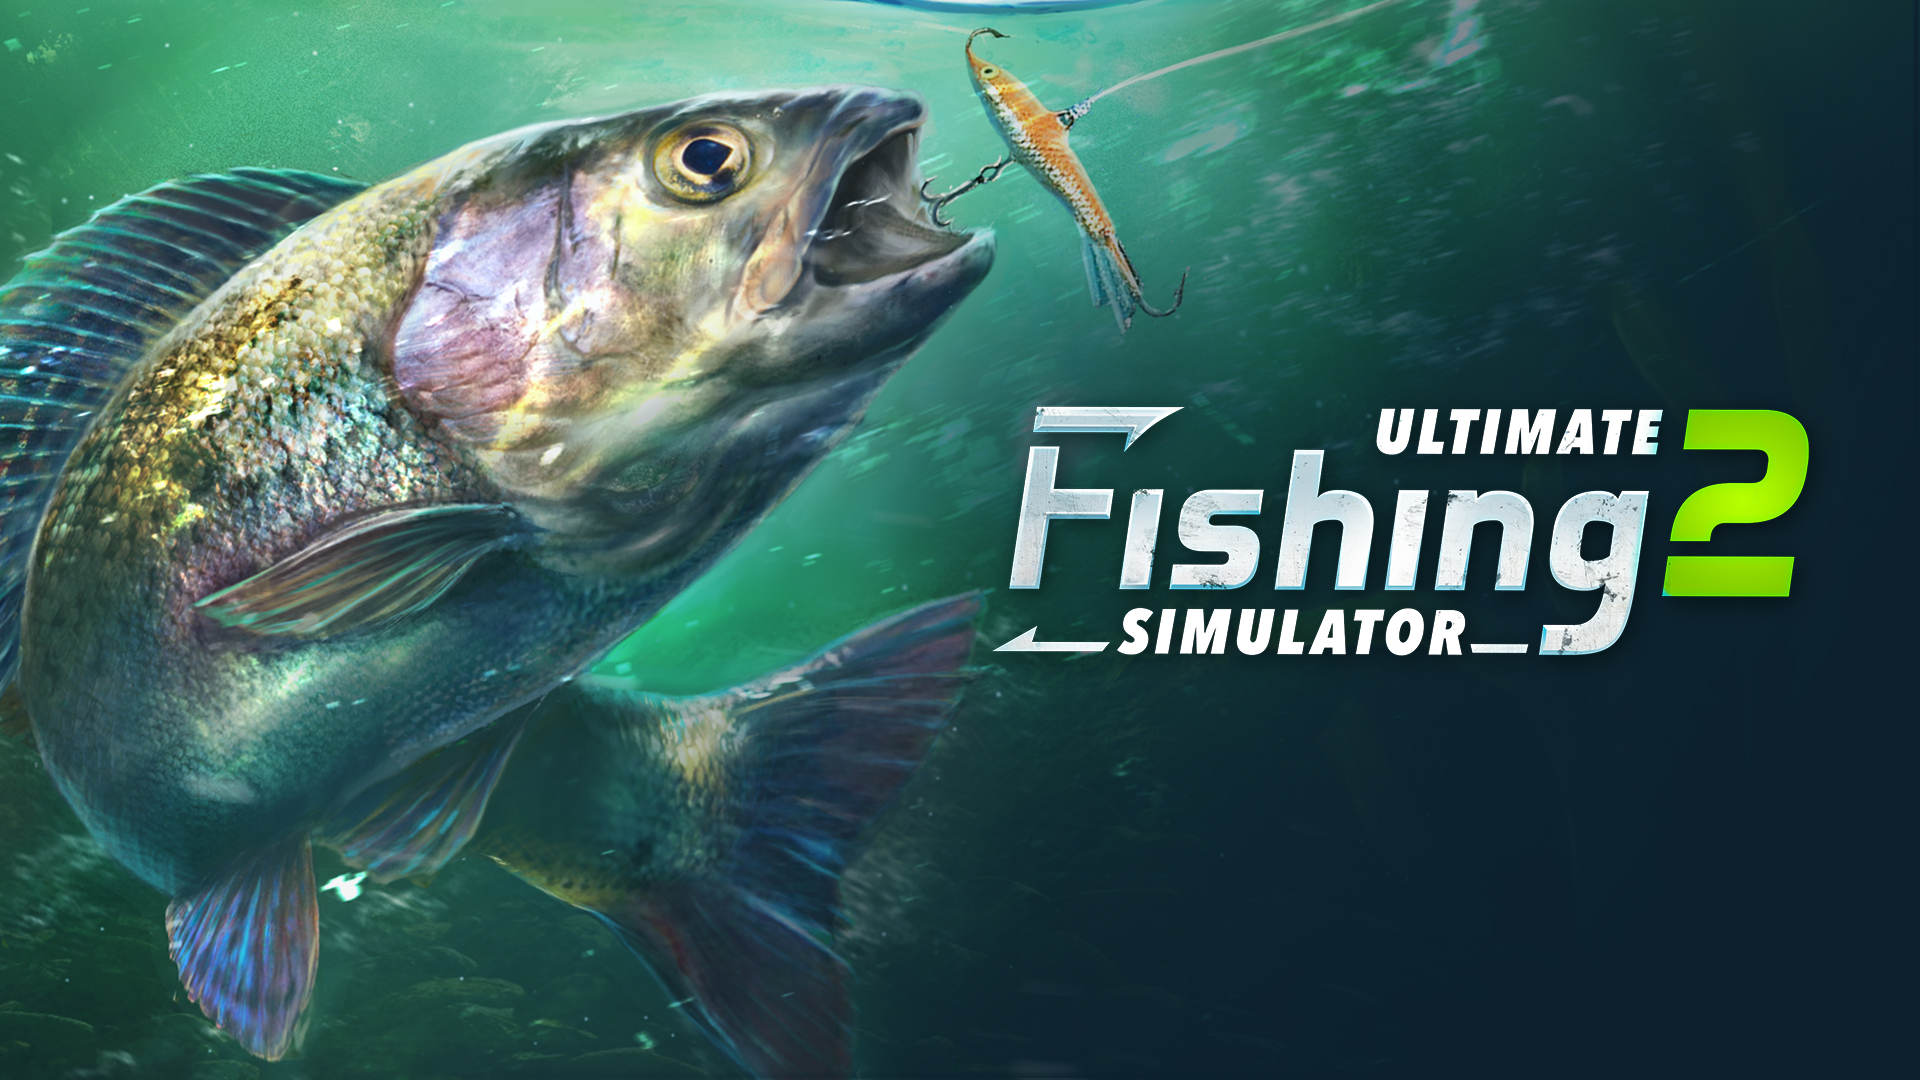 Relaxed fishing in virtual reality with Ultimate Fishing Simulator 2